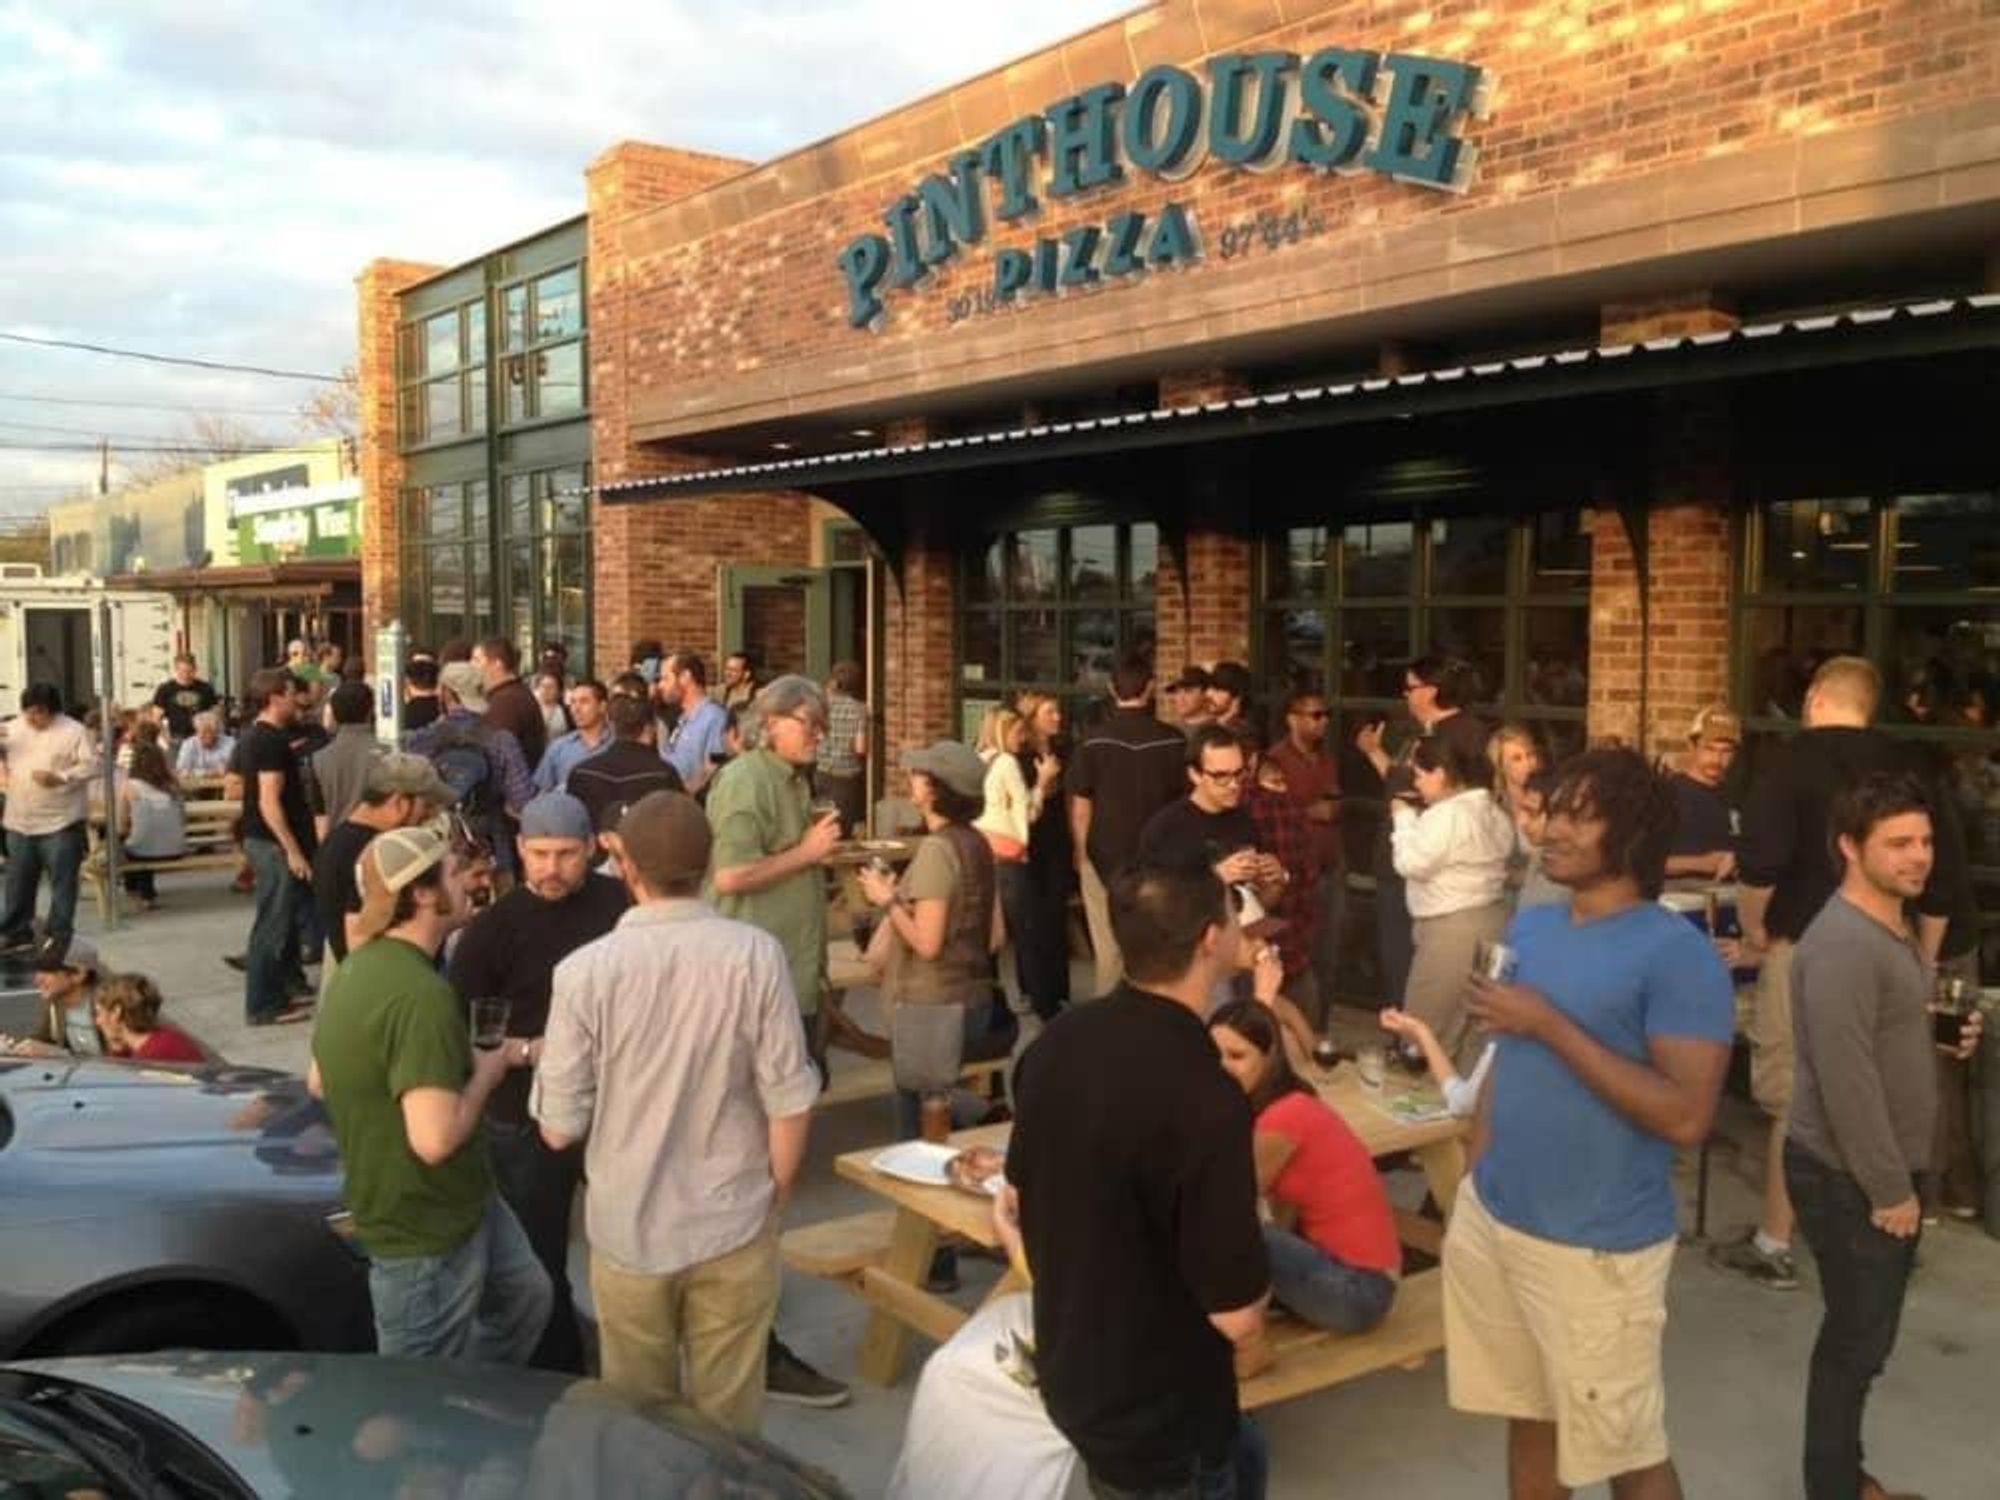 Pinthouse Pizza draws in both beer- and pizza-lovers